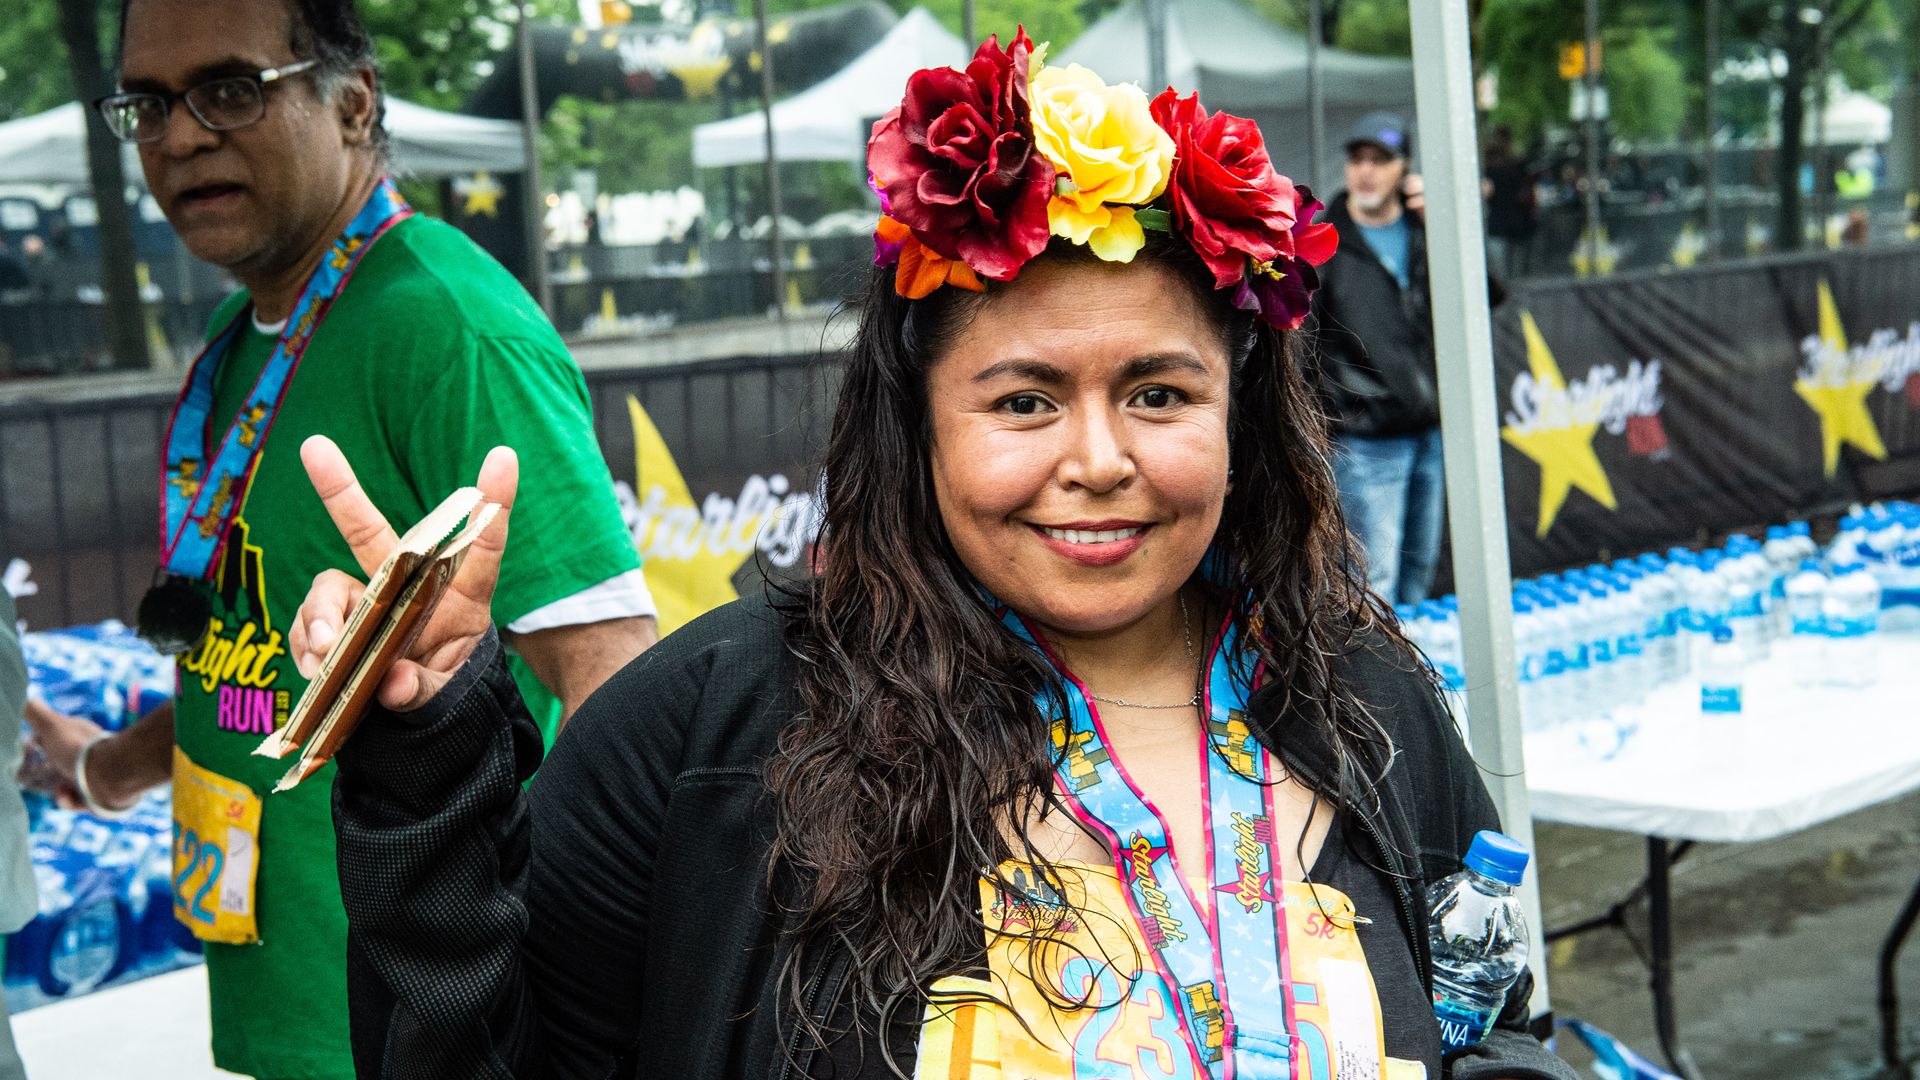 A woman with big red and yellow roses in her hair flashes a peace sign at the camera.